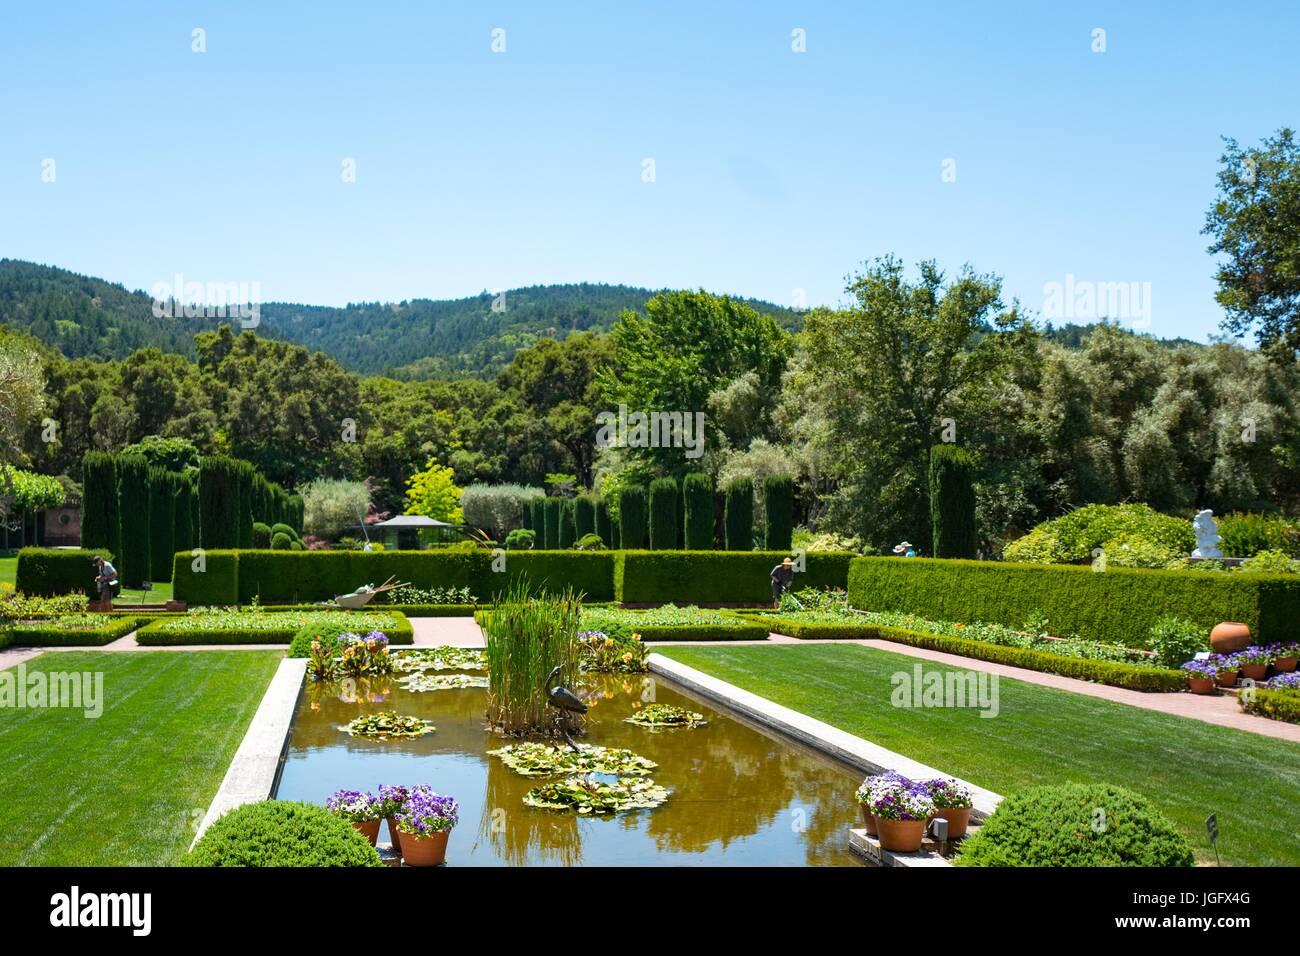 Sunken garden and lawn at Filoli, a preserved country house, formal garden and estate operated by the National Trust for Historic Preservation in Woodside, California, June 23, 2017. Stock Photo